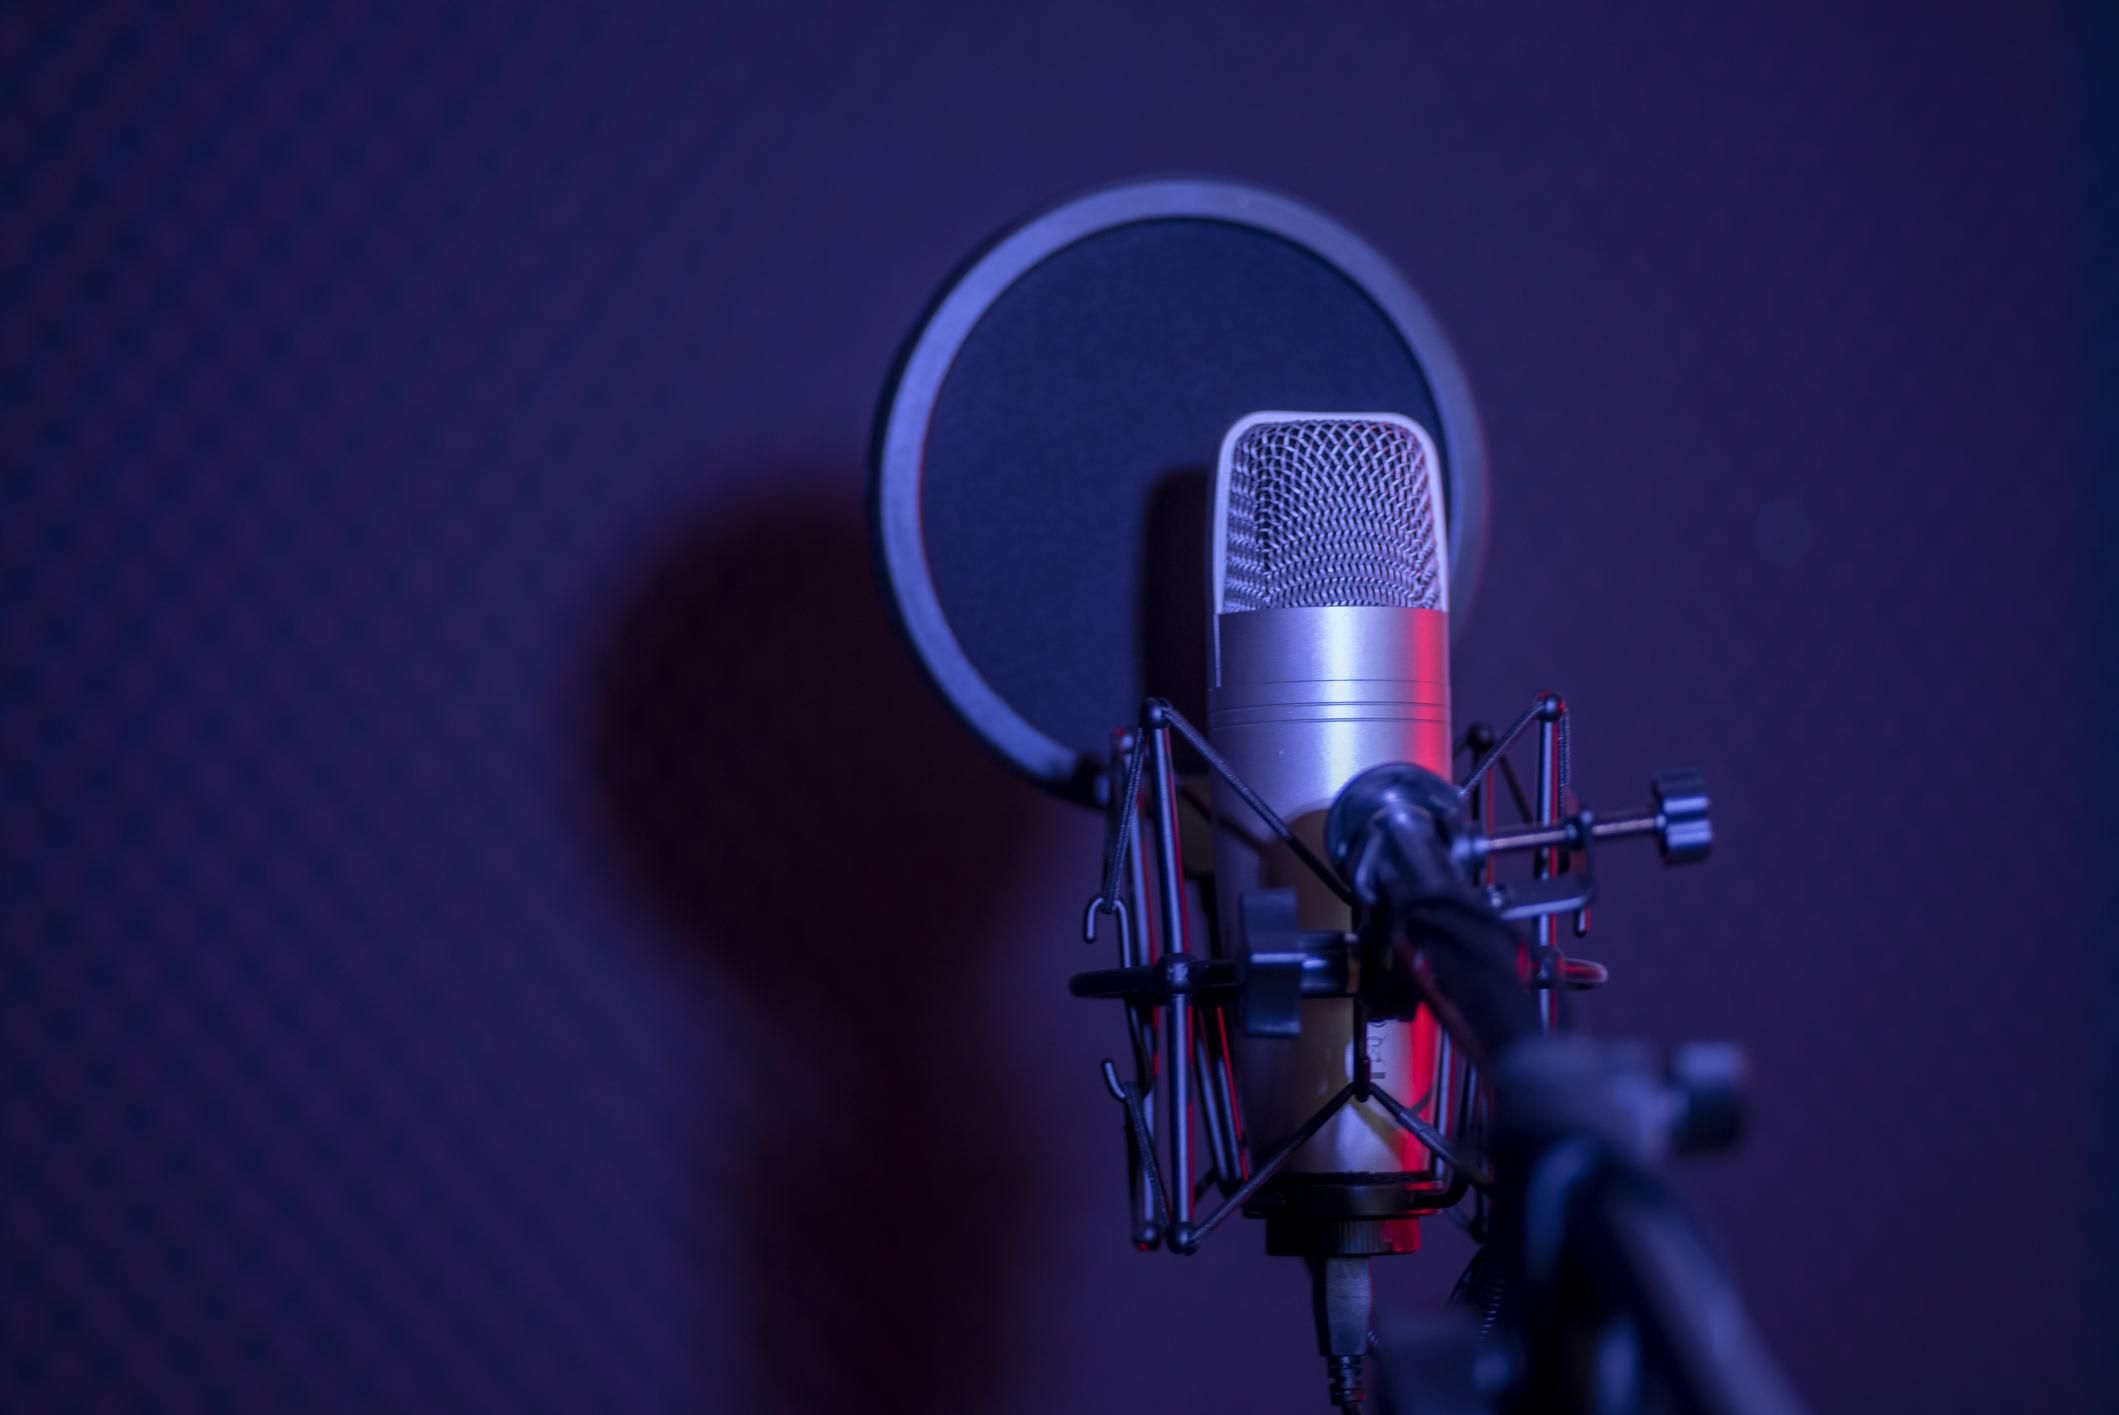 Radio engages, persuades, and informs—and, when done right, builds trust. (Photo: Getty/Stock Photo/athima tongloom)